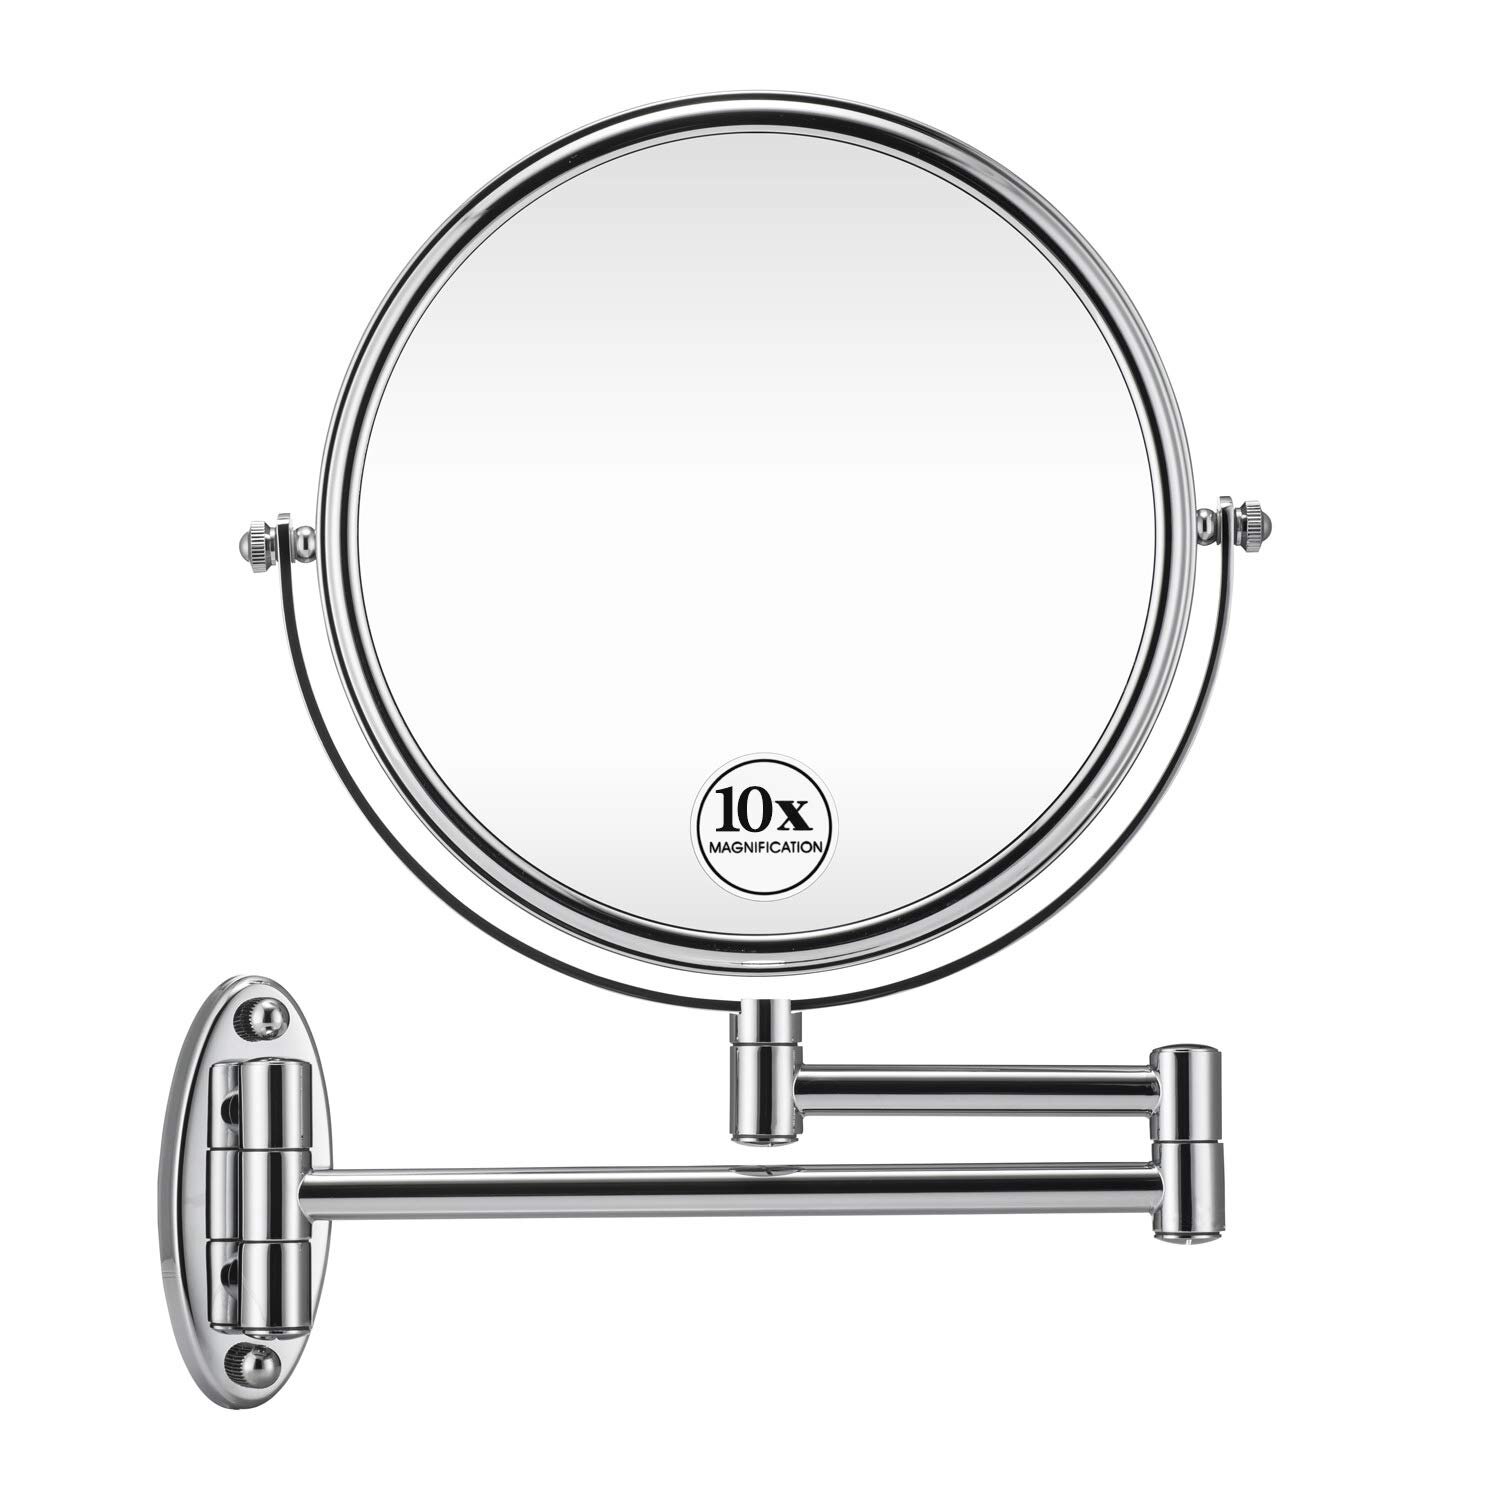 8inch 10x Magnification, Chrome Charmer Wall Mount Magnifying Mirror Chrome Finish with 10x Magnification,8-Inch Two-Sided Swivel, 